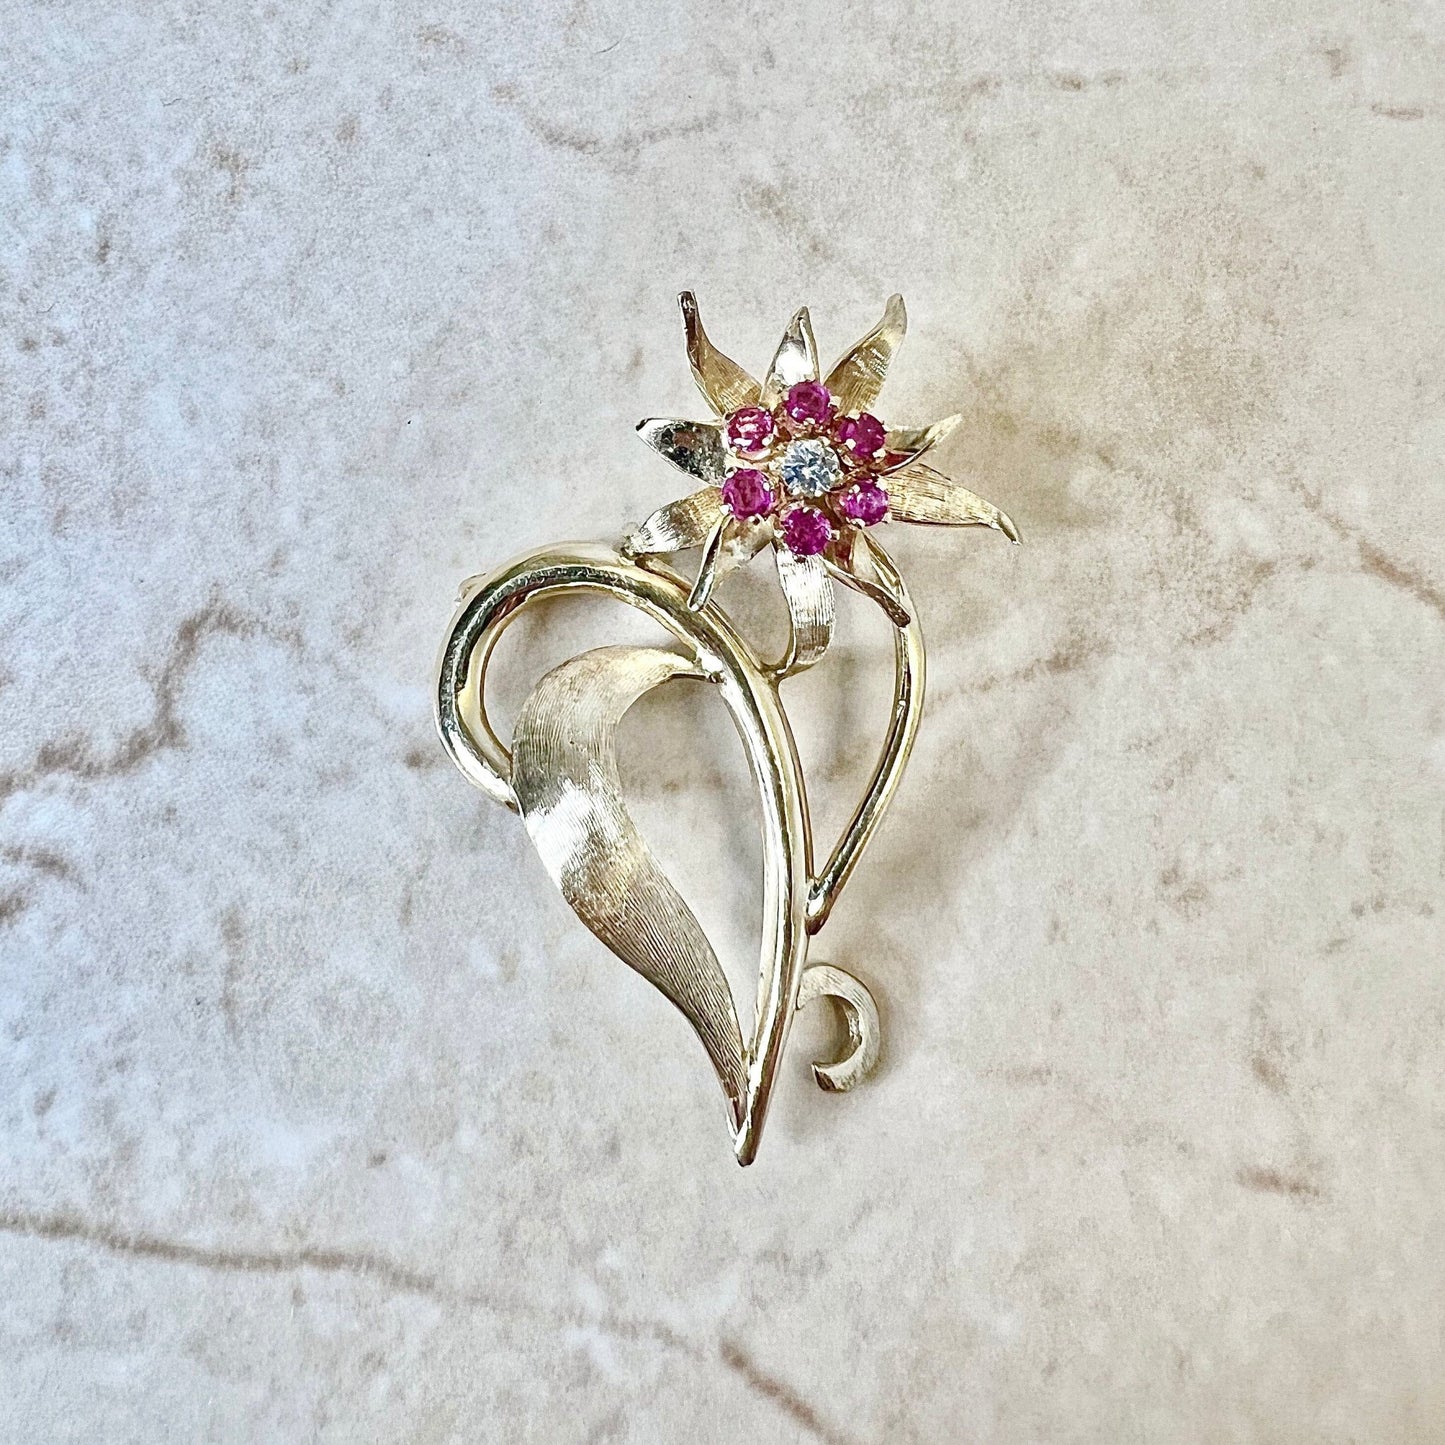 Vintage 1960’s 14K Diamond & Ruby Brooch - Yellow Gold Heart/Flower Brooch - Gold Ruby Pin - July Birthstone - Valentine’s Gift For Her